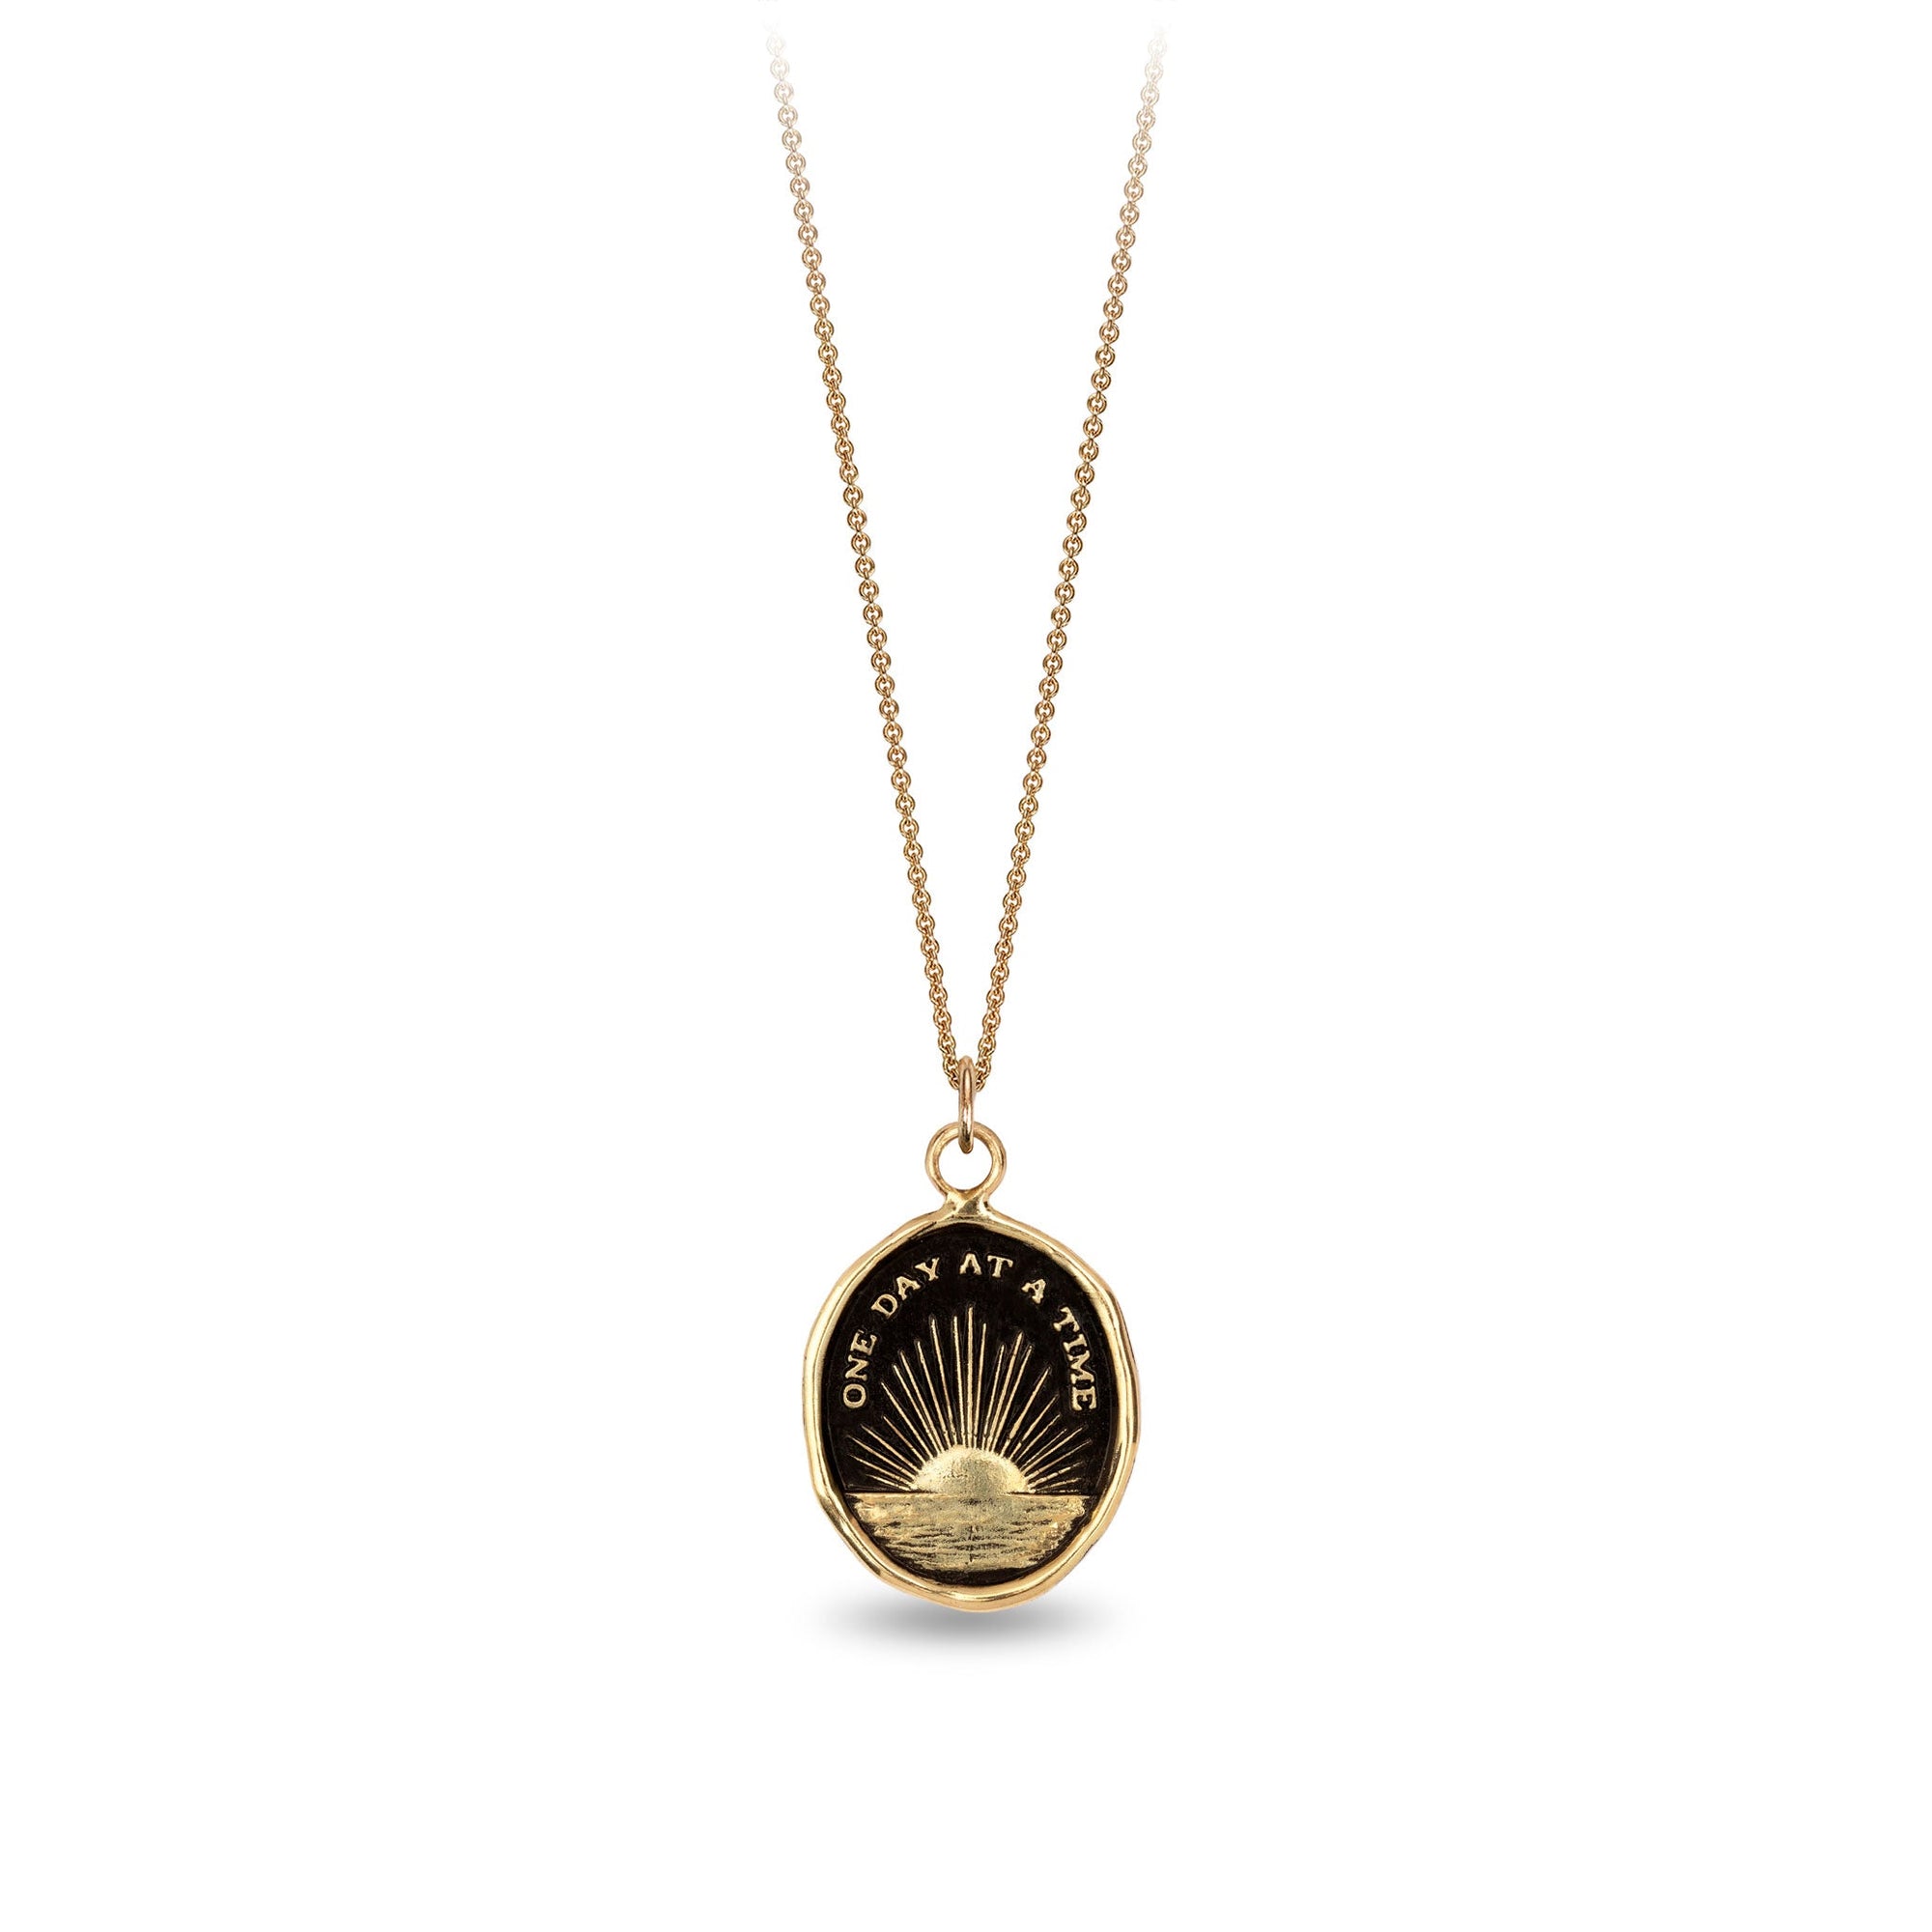 One Day at A Time 14K Gold Talisman